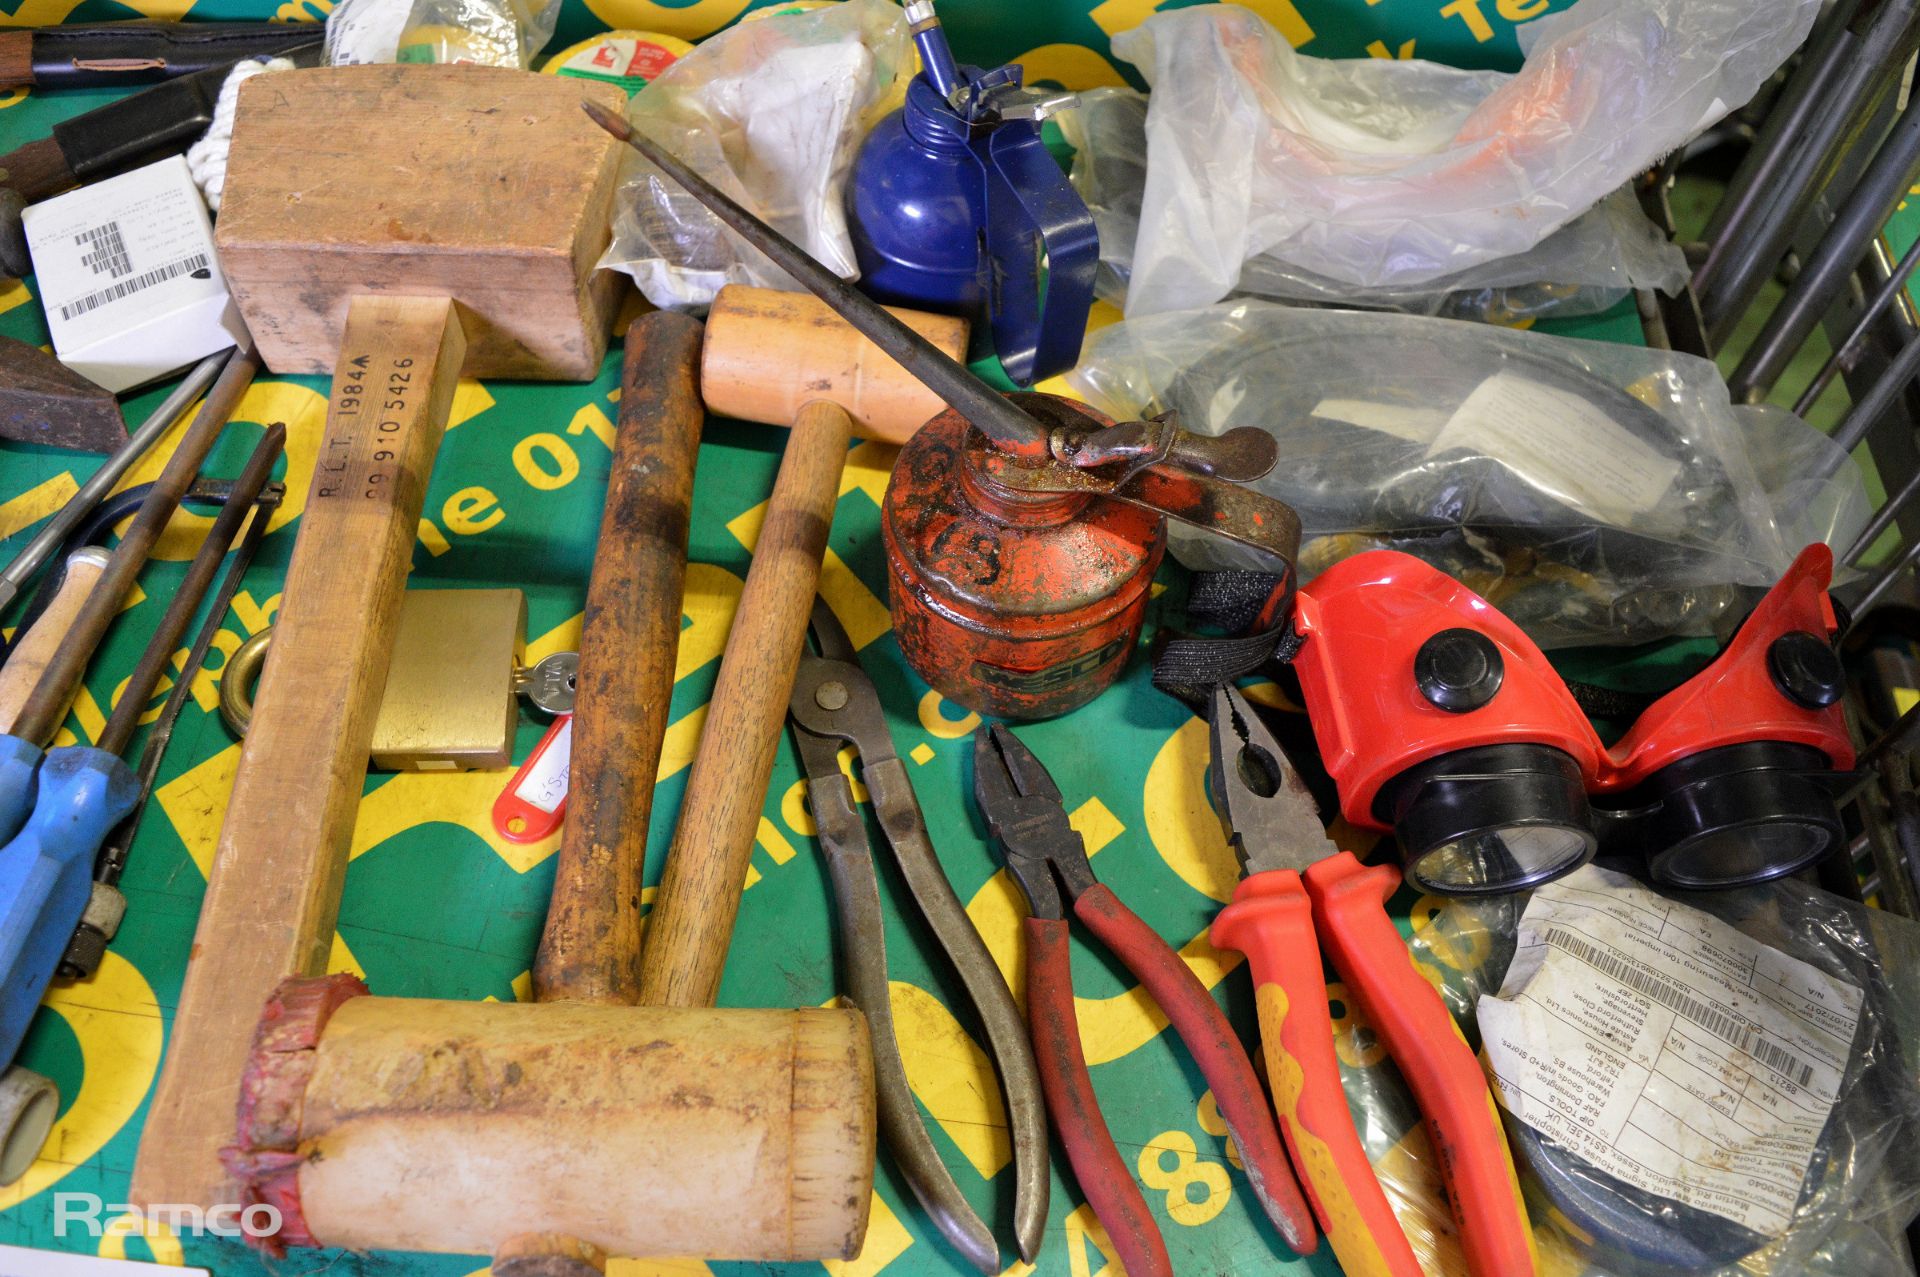 Hand Tools - Mallet, Goggles, Hammer, Screwdriver, hand drill, oil cans, pliers, wrench - Image 3 of 3